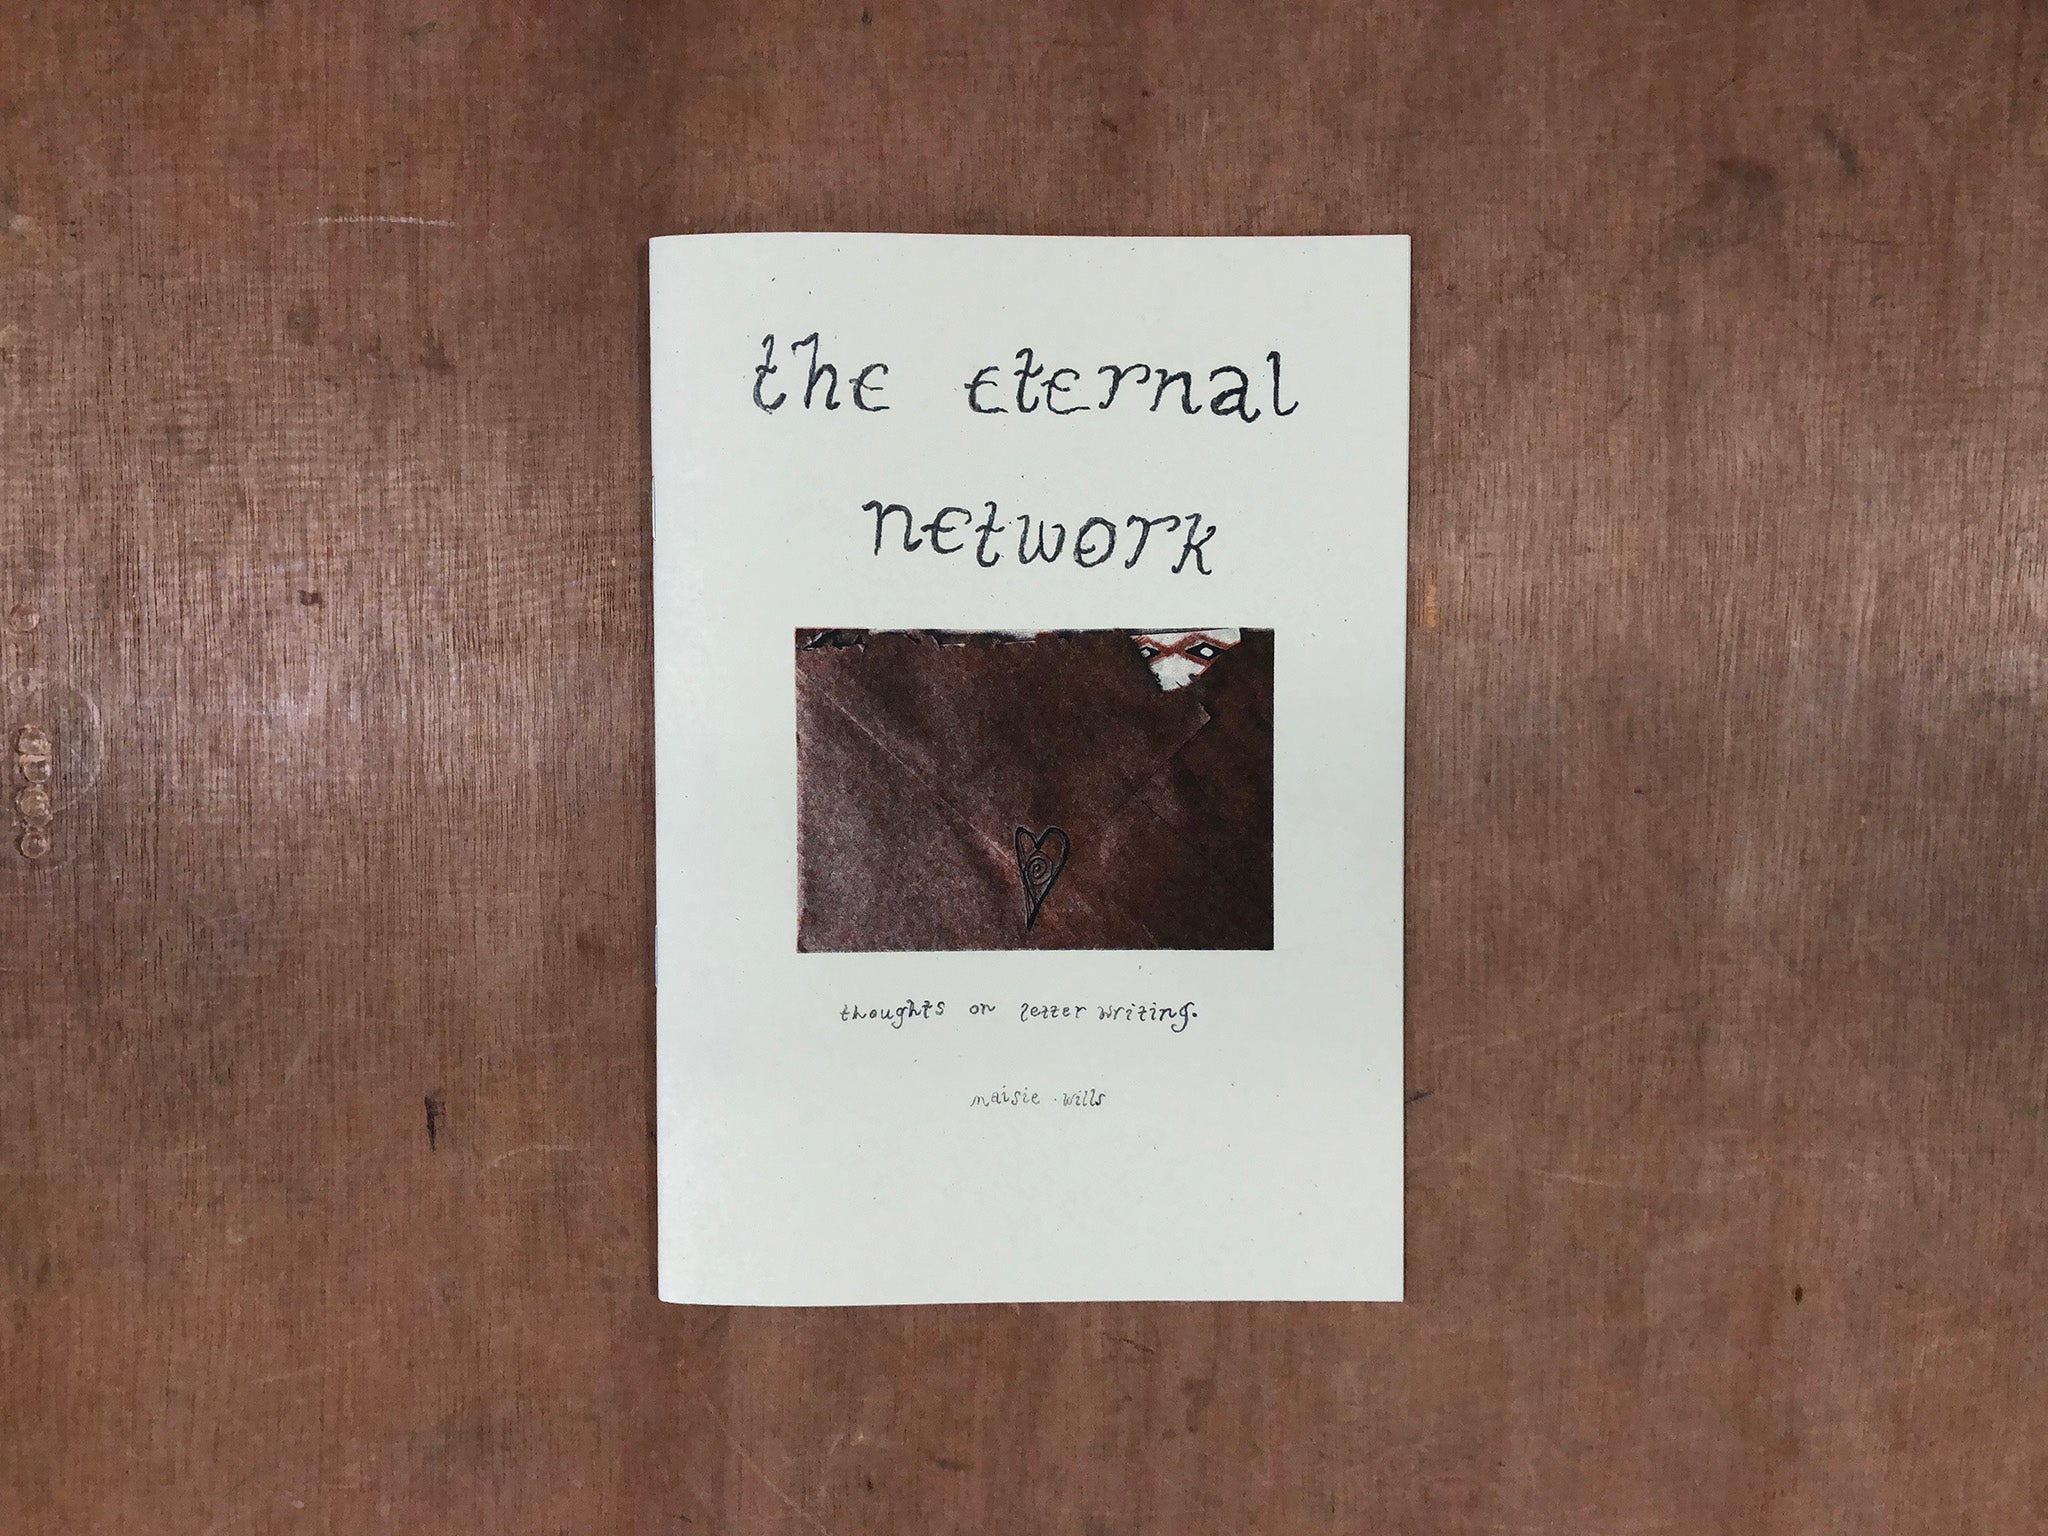 THE ETERNAL NETWORK: THOUGHTS ON LETTER WRITING by Maisie Wills